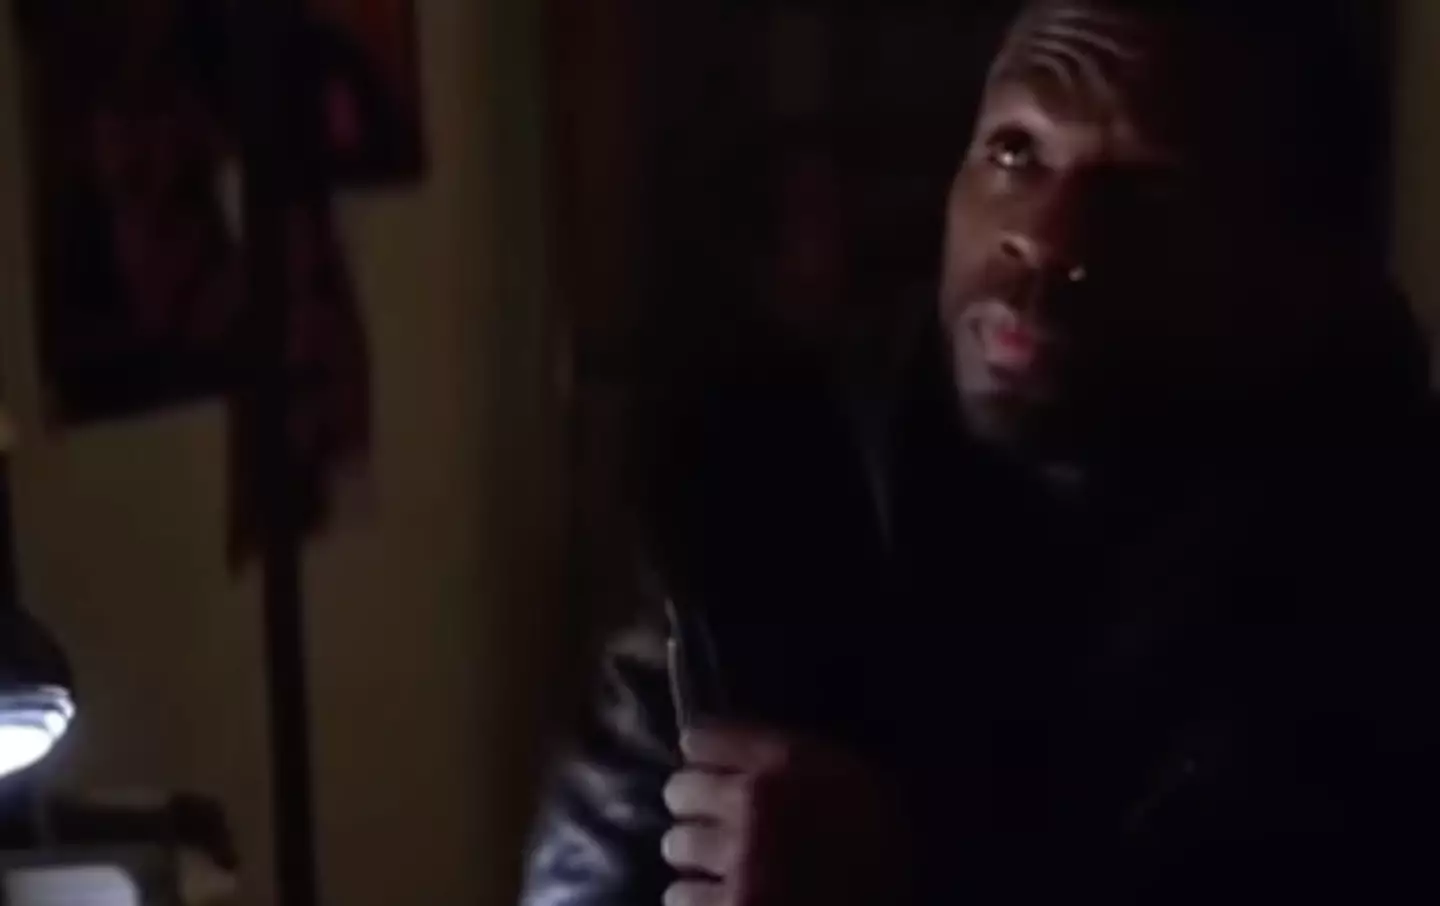 In the clip, Shawn realises his father Kanan (played by 50 Cent) has been using him.